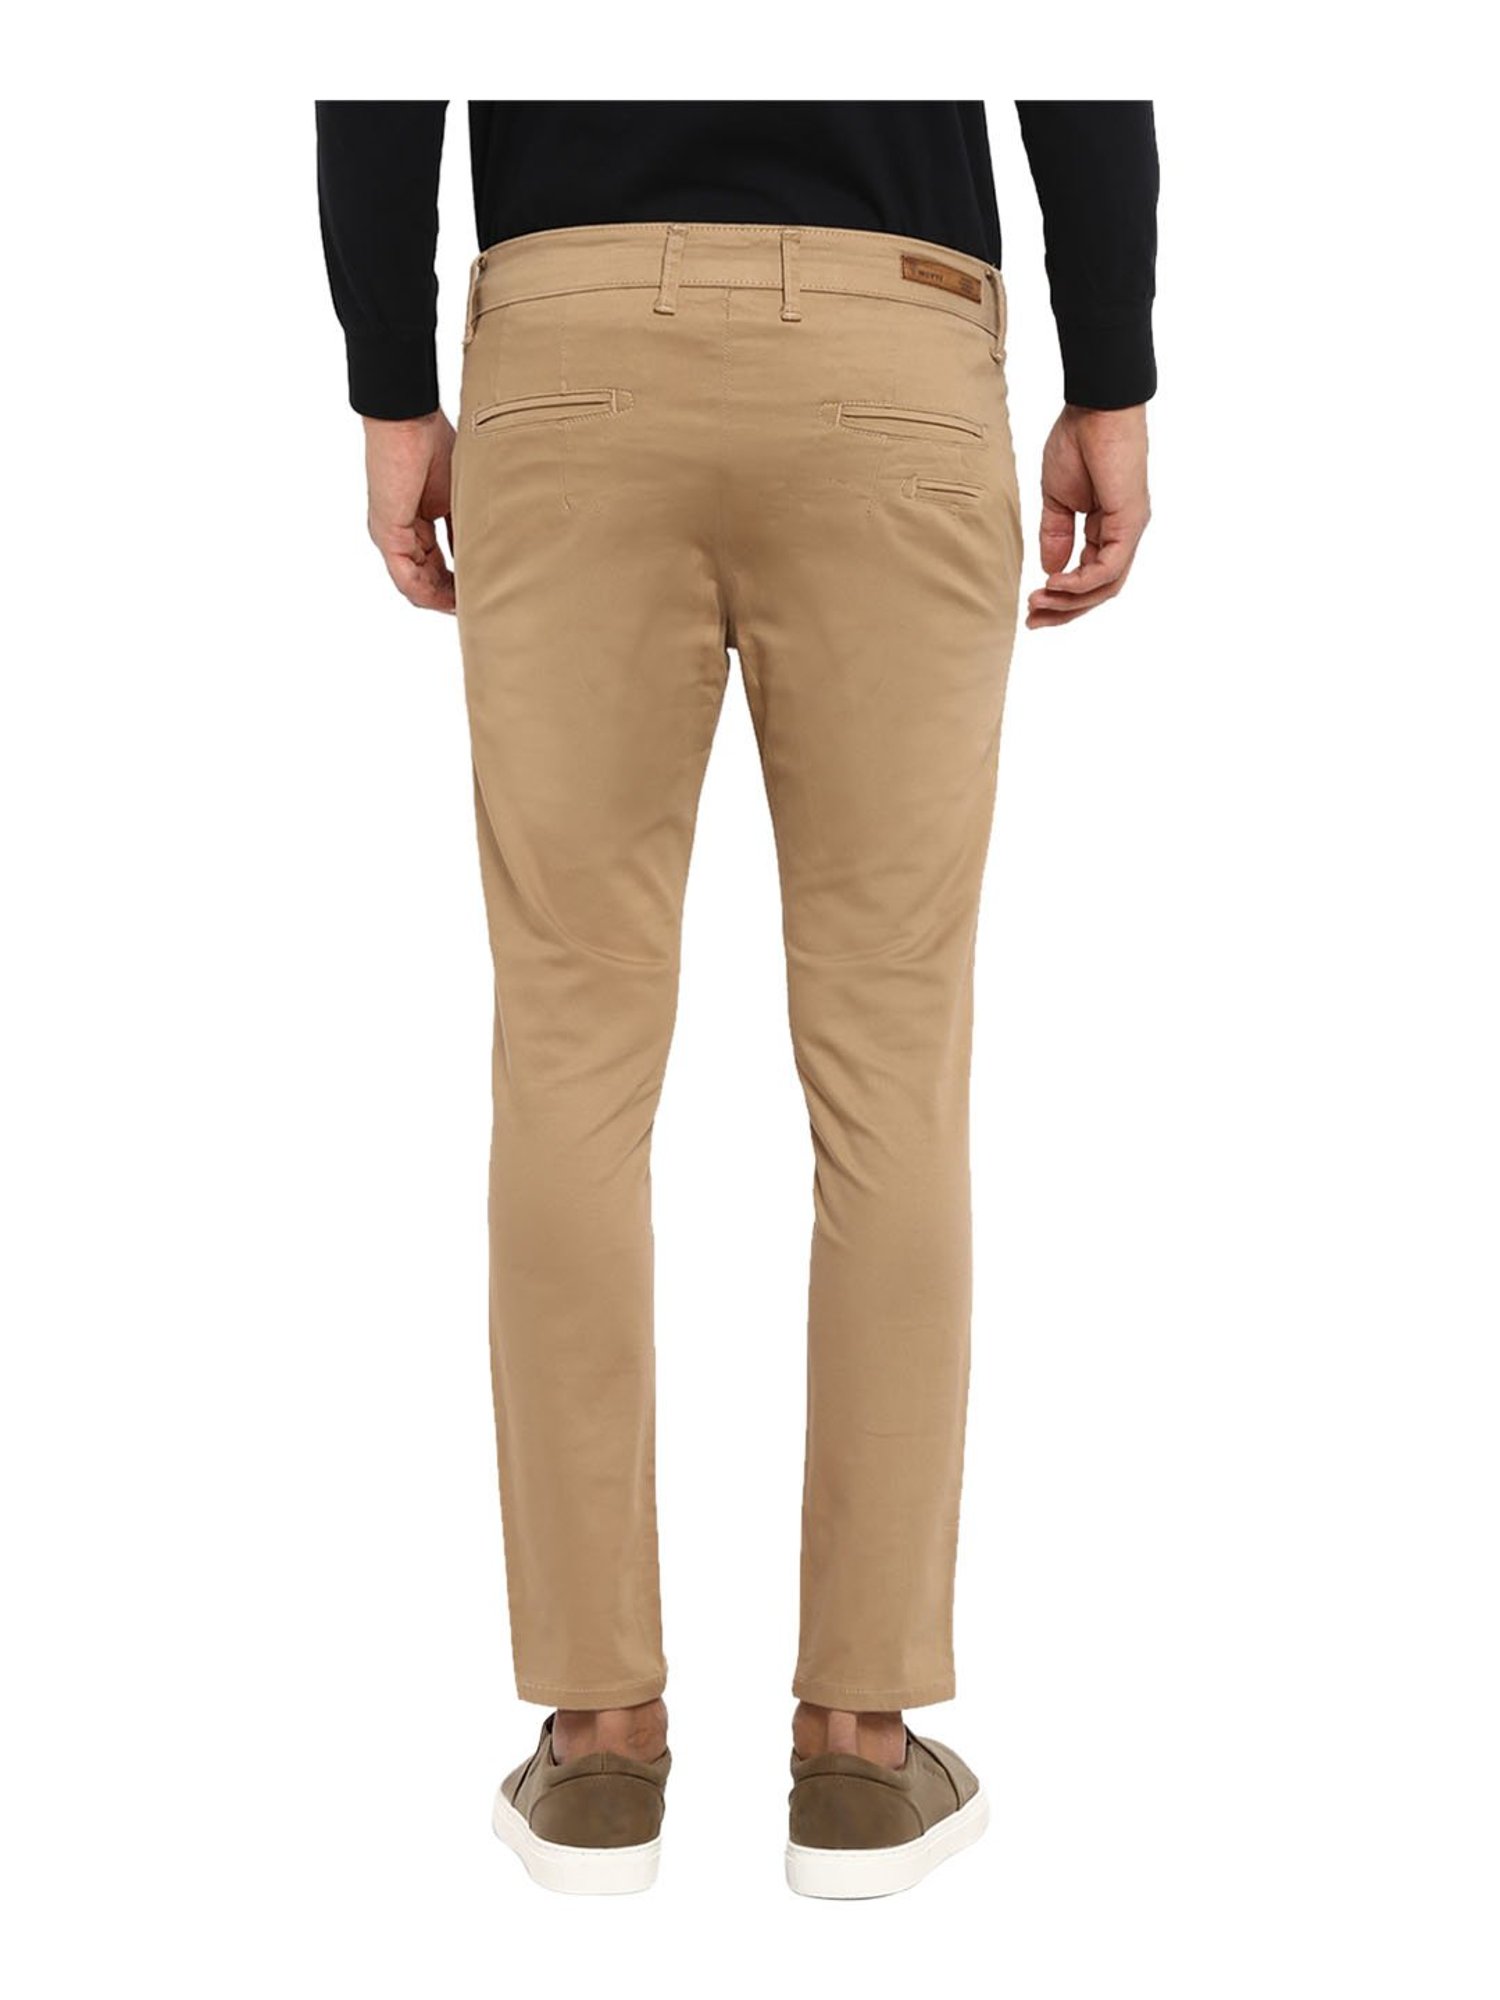 Mufti Casual Trousers  Buy Mufti Khaki Mens Ankle Length Slim Fit Trousers  Online  Nykaa Fashion